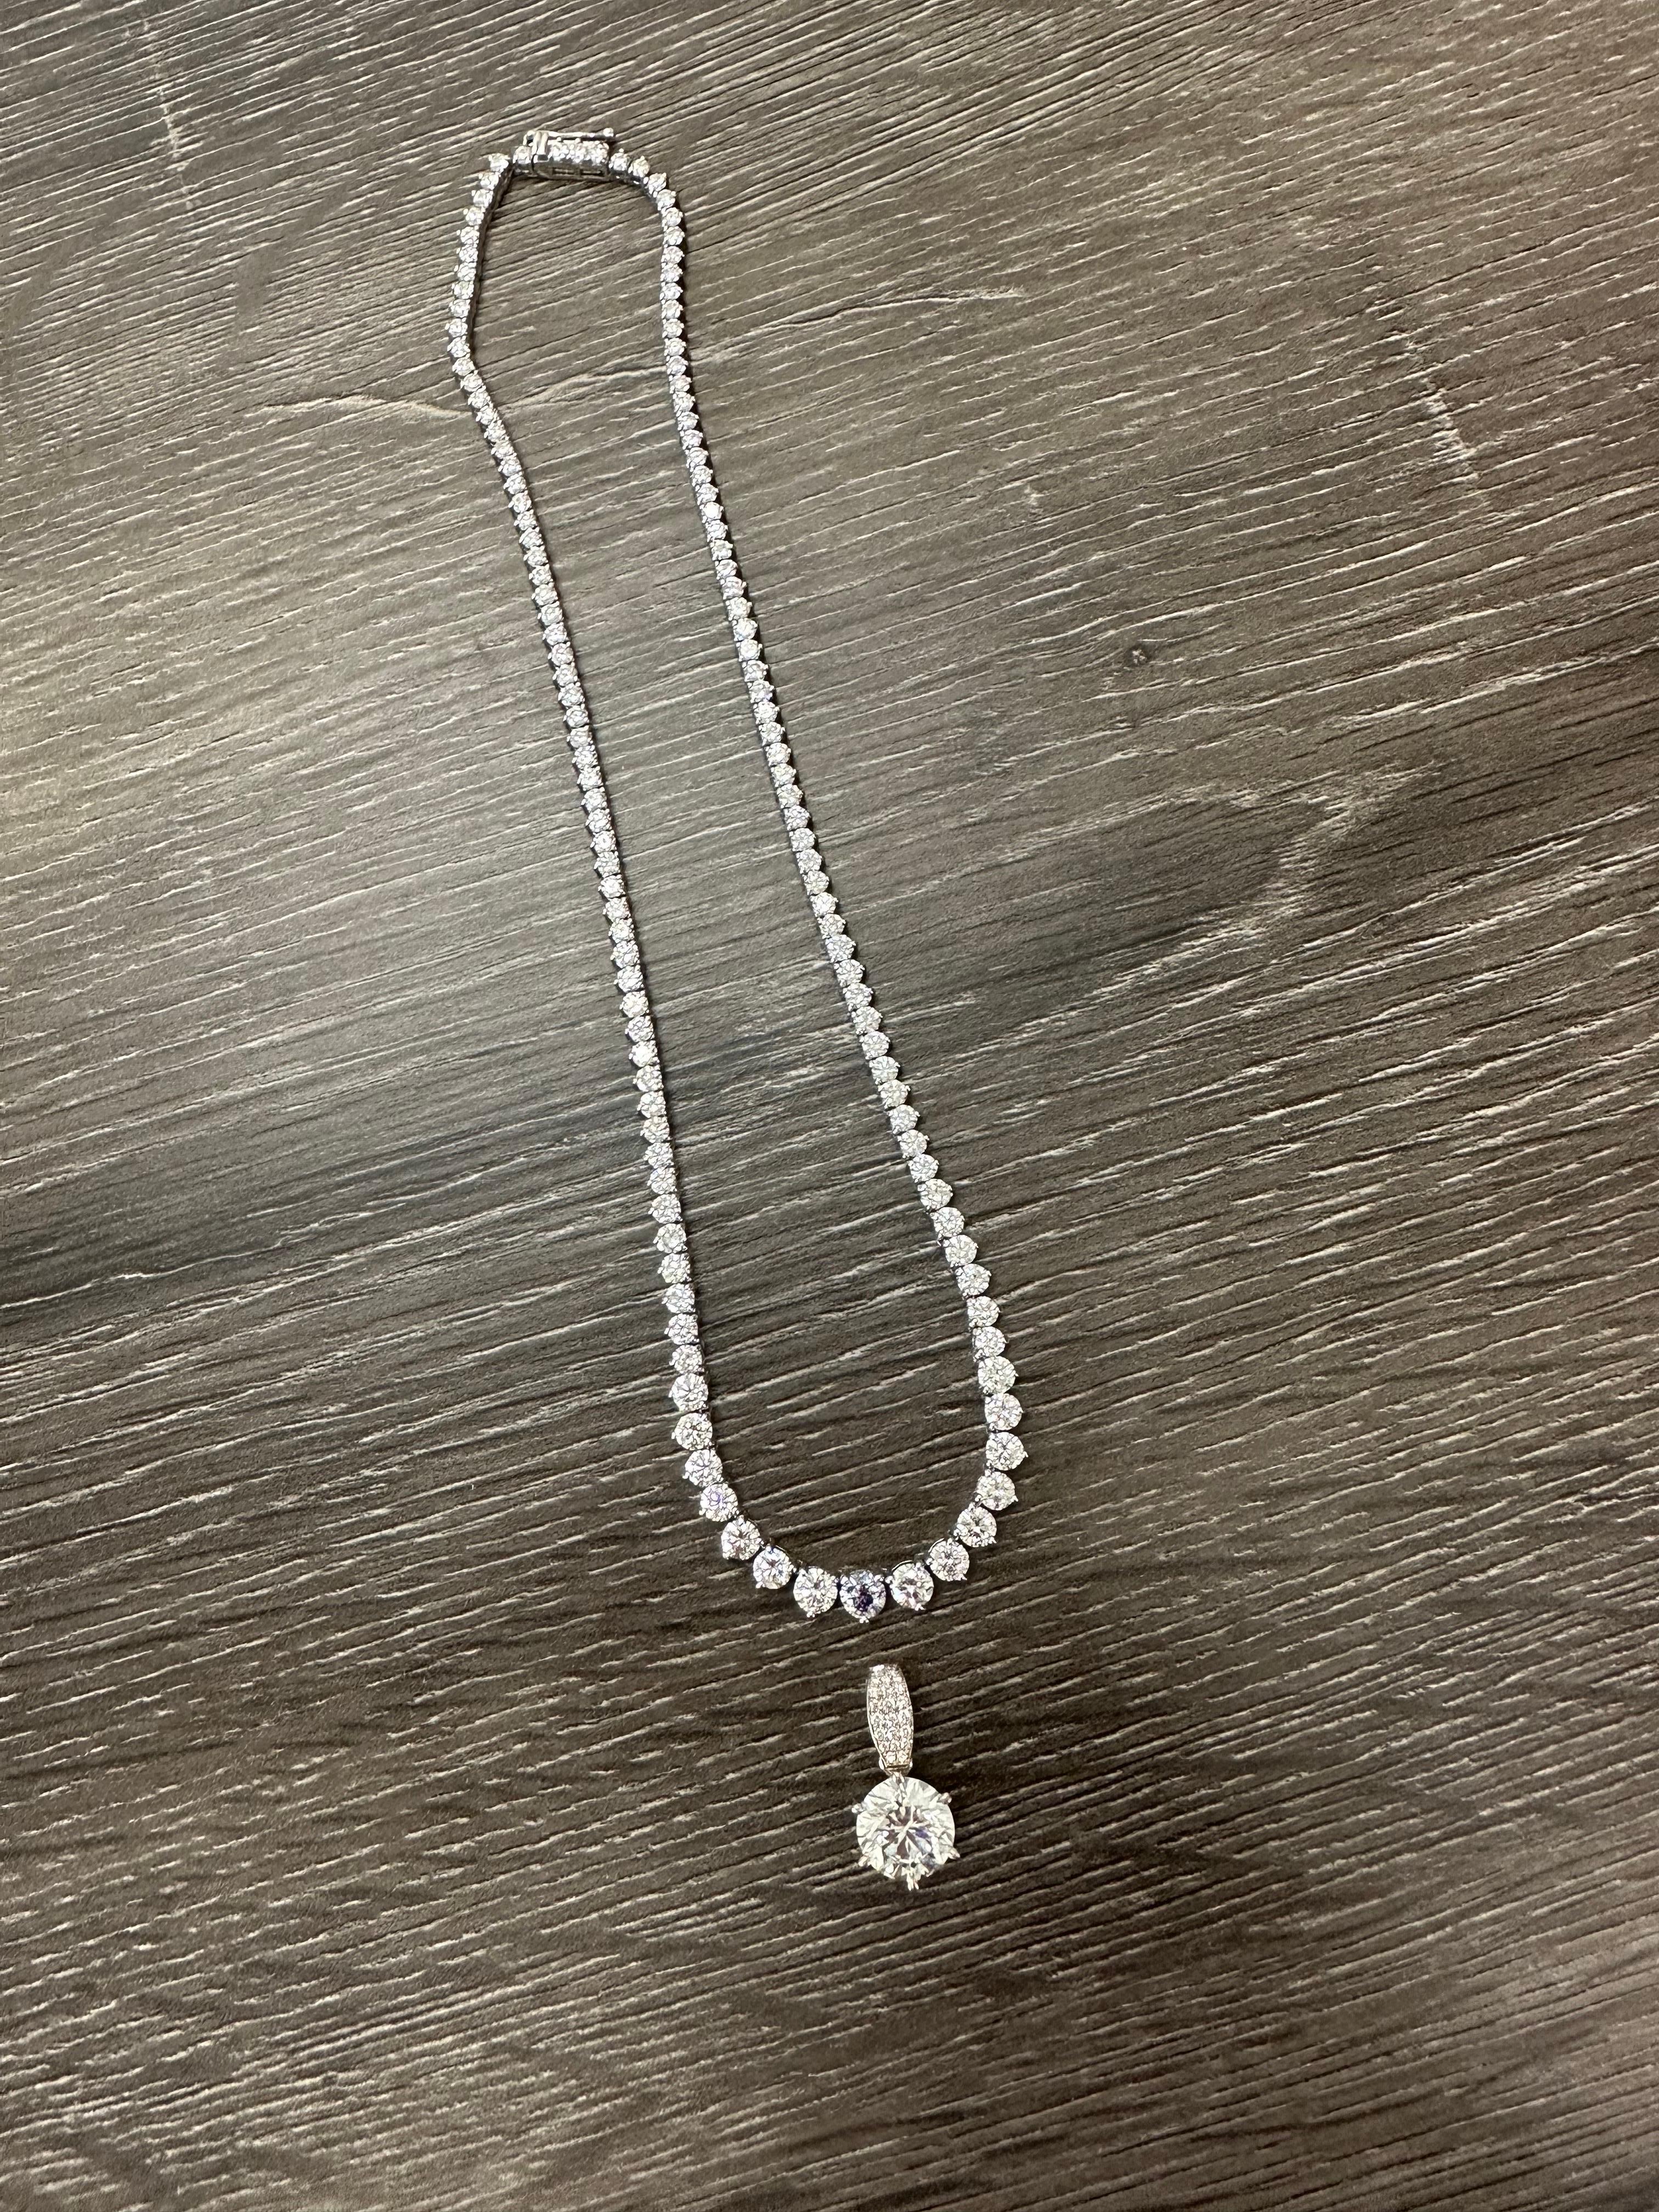 Stunning diamond necklace, bow design in 14KT white gold, made from scratch, pendant is detachable and can be worn by itself as a pendant.

Metal Type: 18KT
Center diamond is 4 carats Si clarity and G color 
Diamond on the necklace are 16 carats in